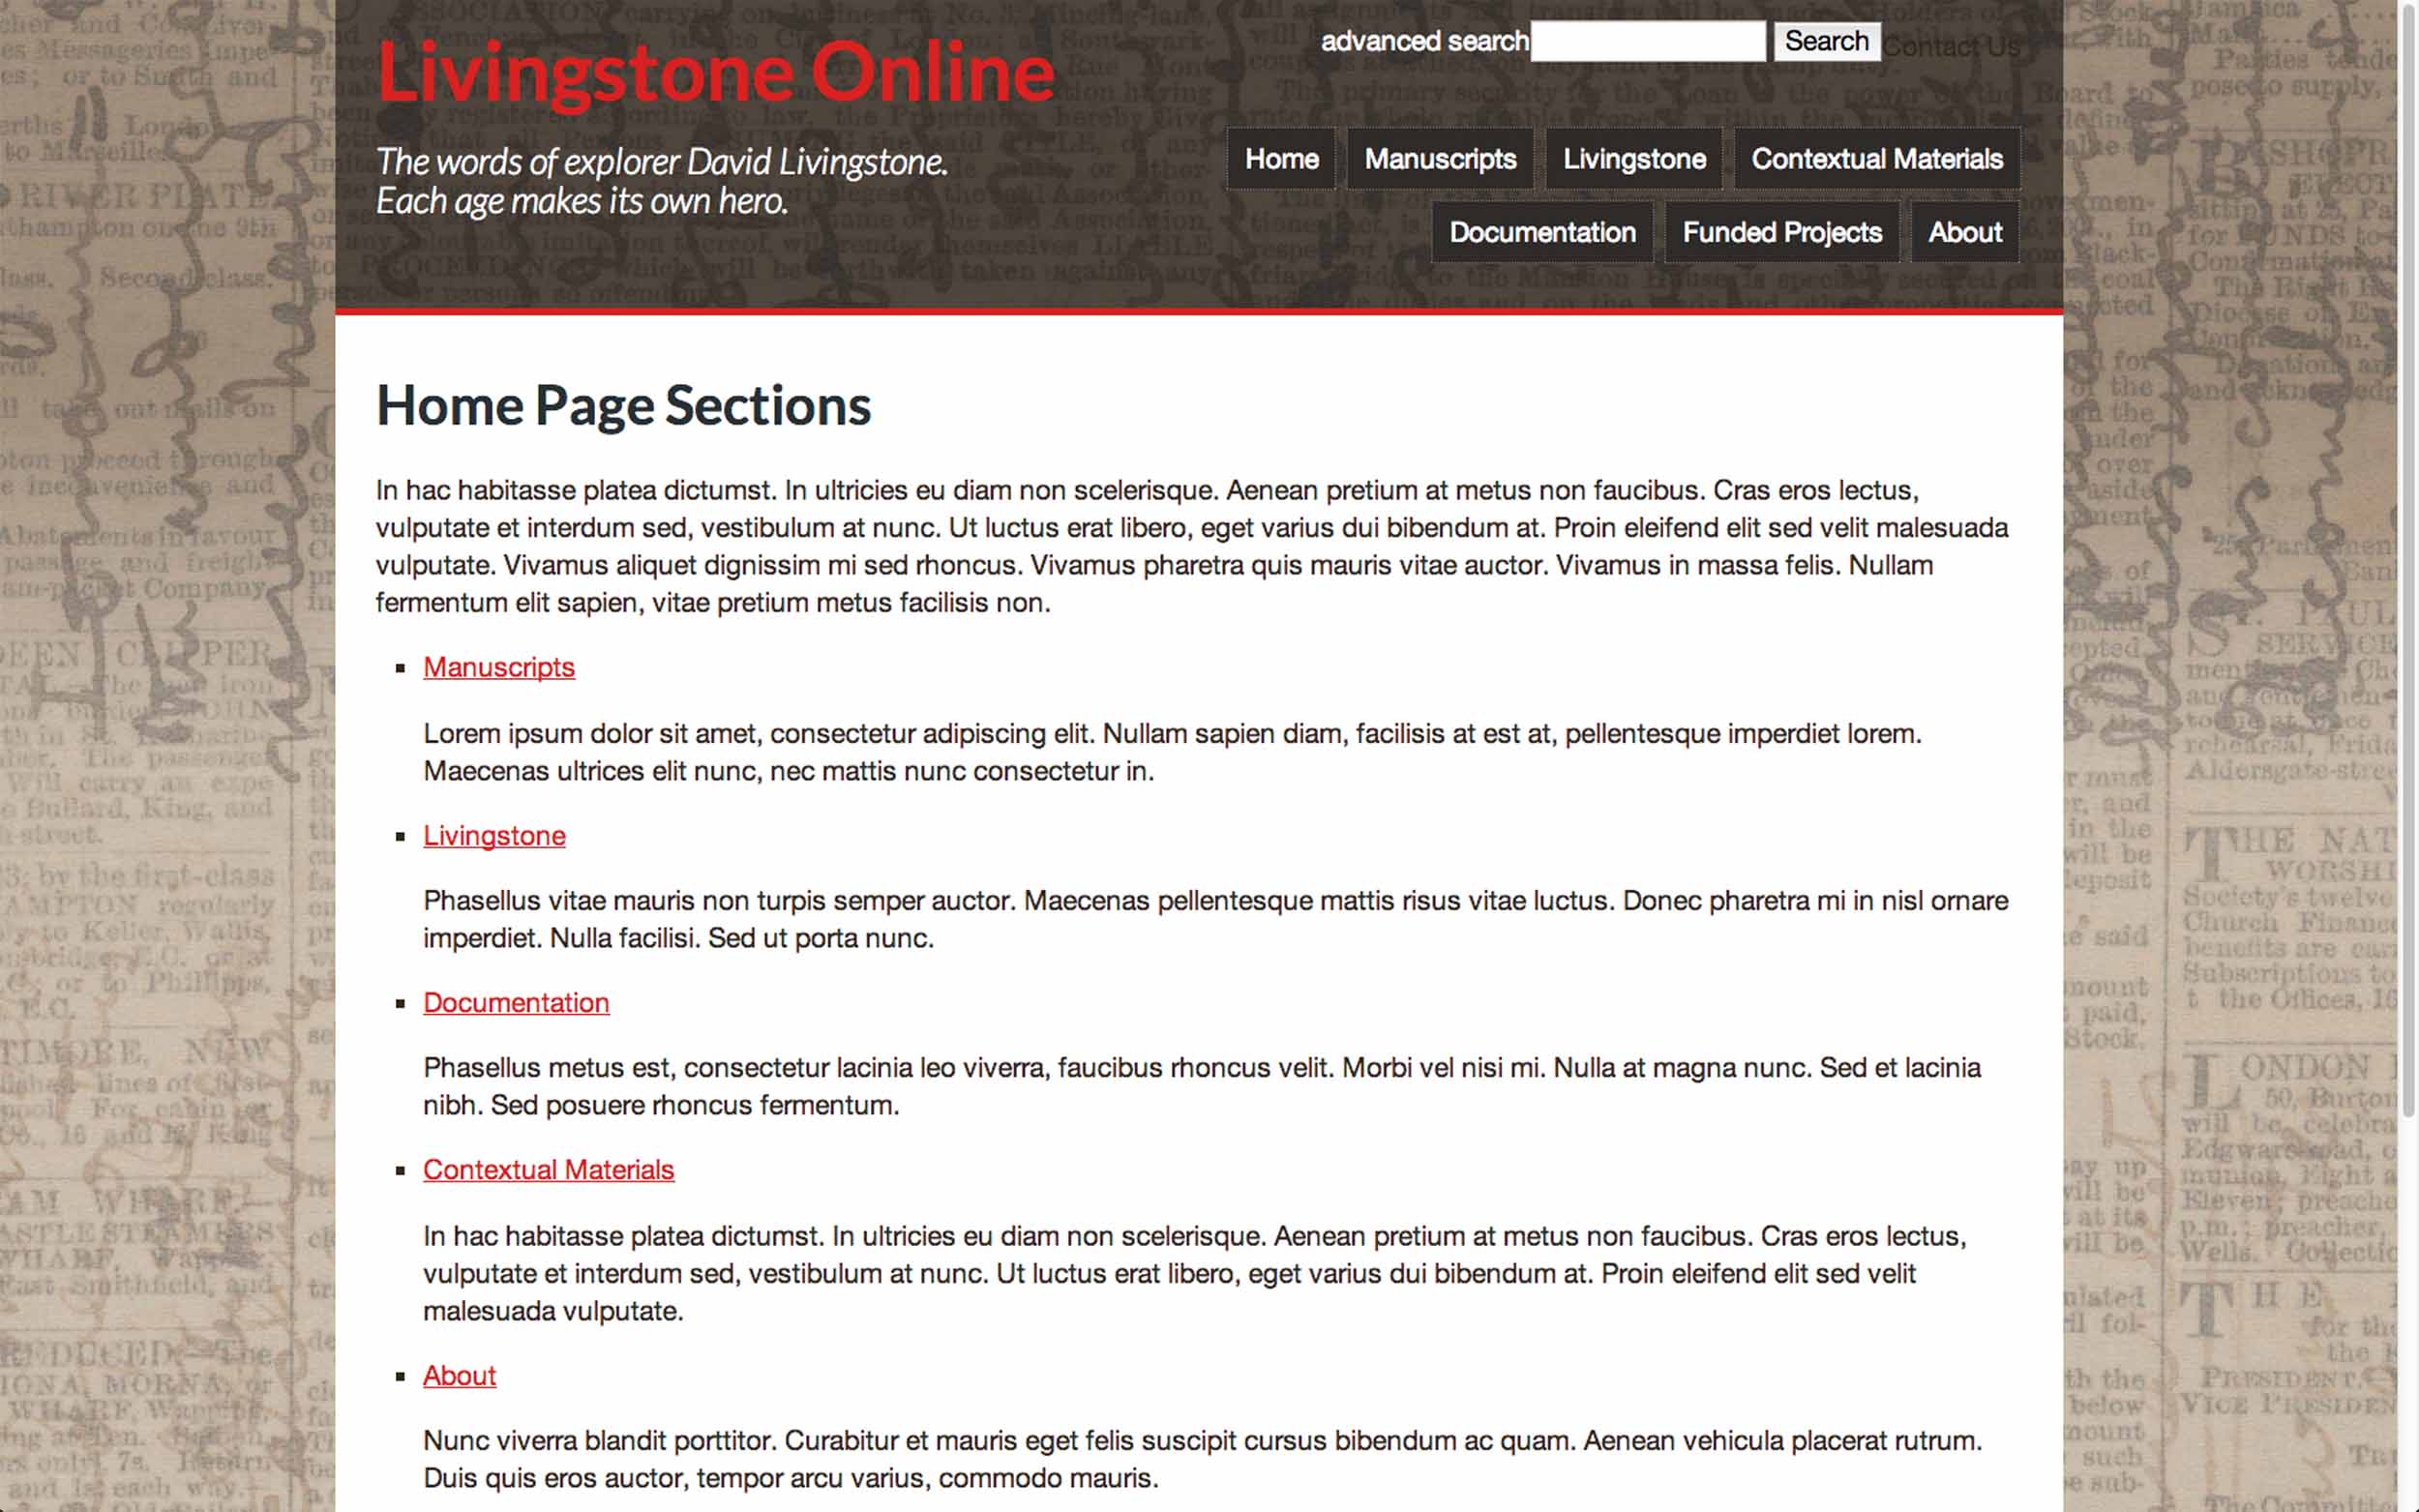 An early design mockup for the new Livingstone Online, 2013. Copyright Karin Dalziel. Creative Commons Attribution-NonCommercial 3.0 Unported (https://creativecommons.org/licenses/by-nc/3.0/).